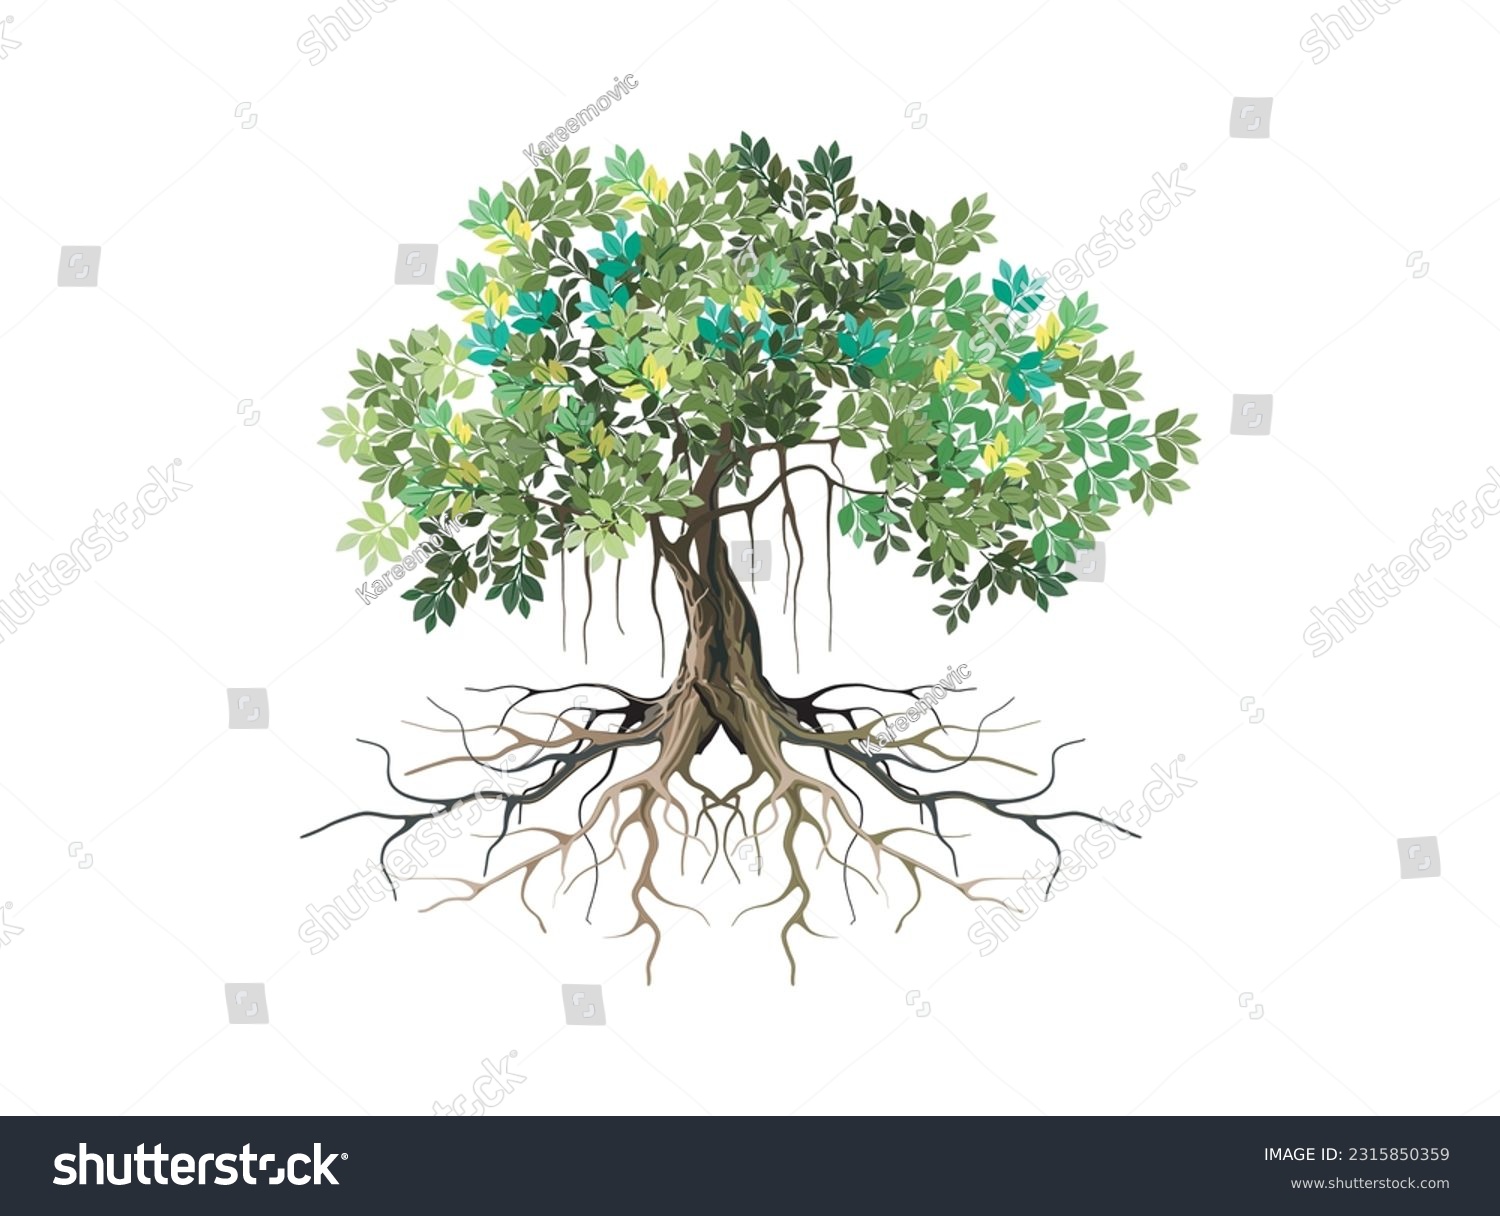 SVG of banyan tree and roots illustration vector svg